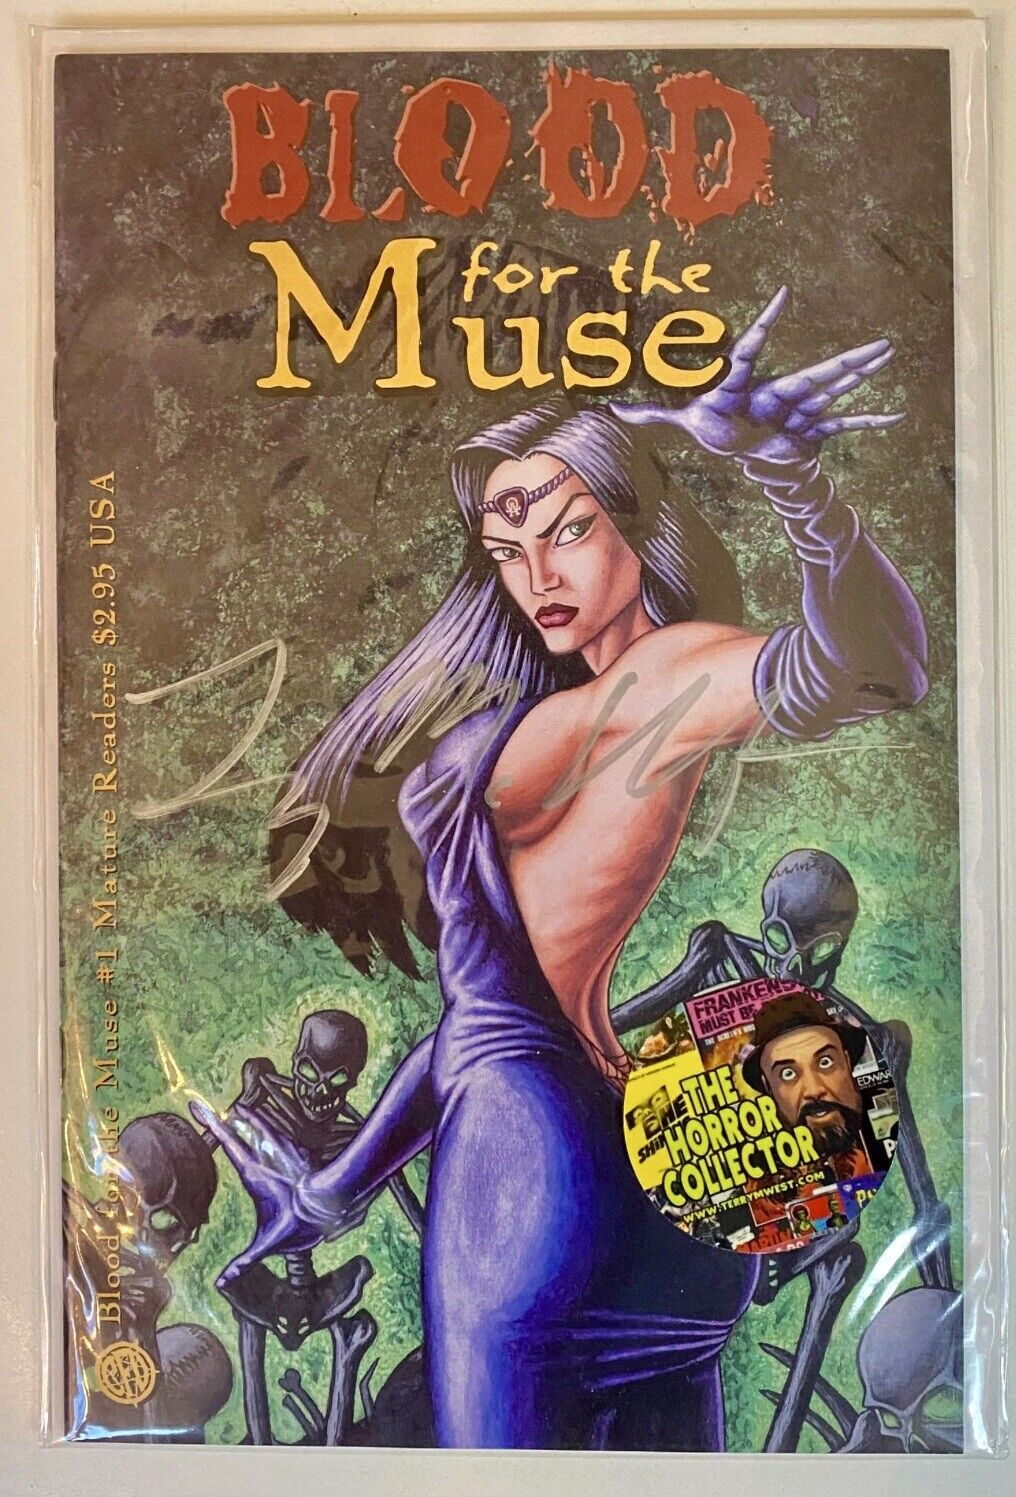 BLOOD FOR THE MUSE #1 - CFD 1997 - SIGNED BY AUTHOR/VERY RARE -GLENN CHADBOURNE